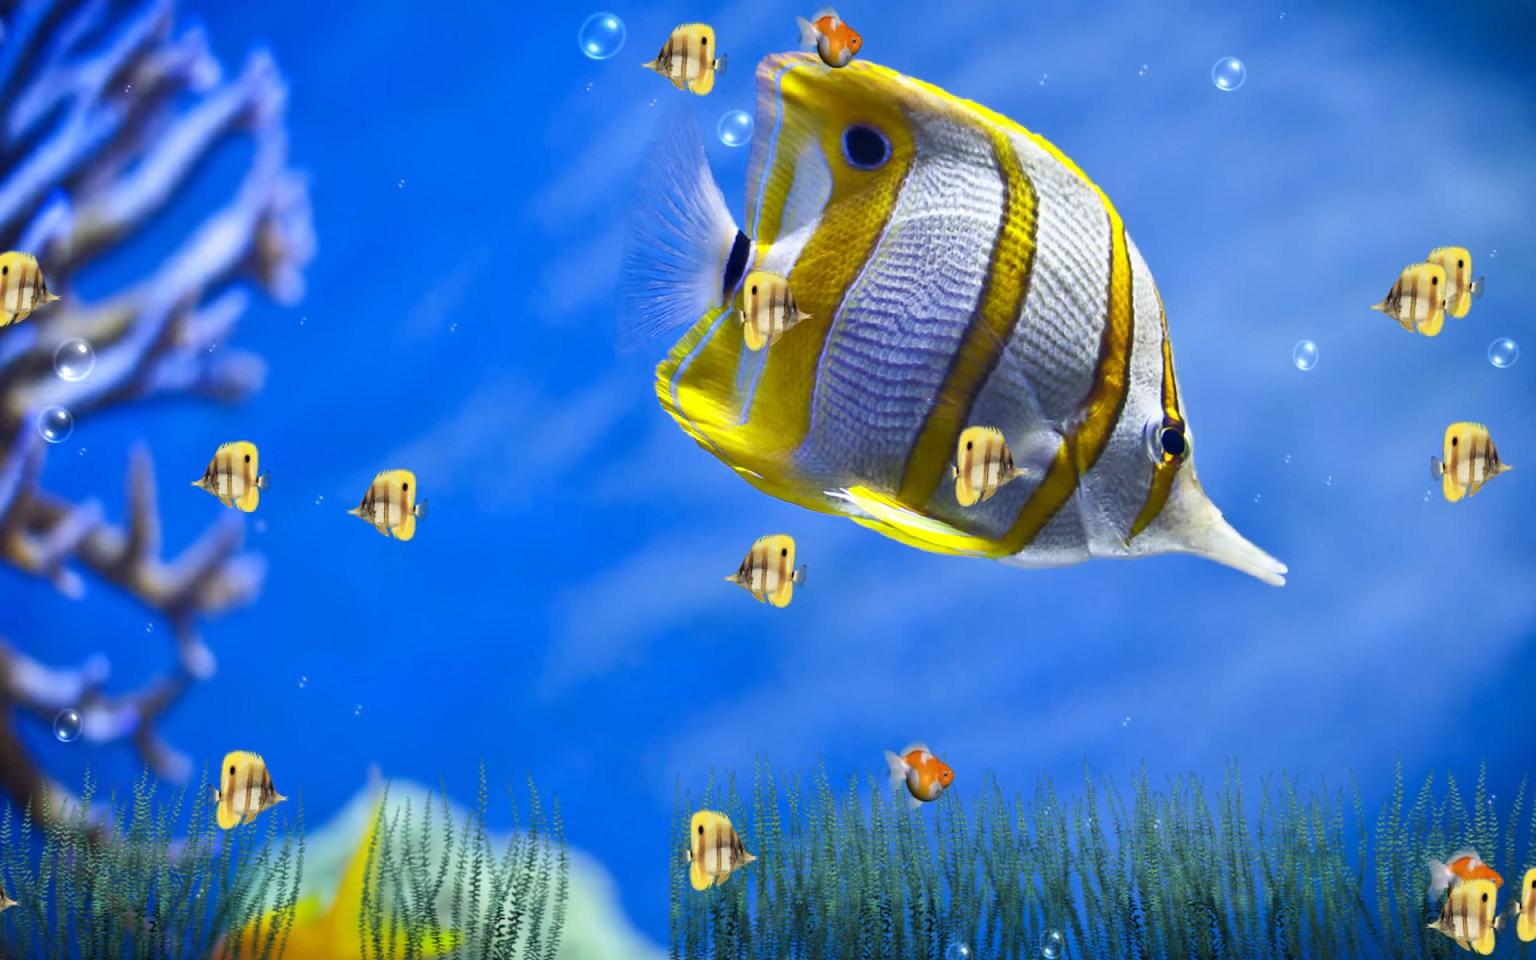 Animated Wallpaper Of Fish In HD For Desktop Jpeg